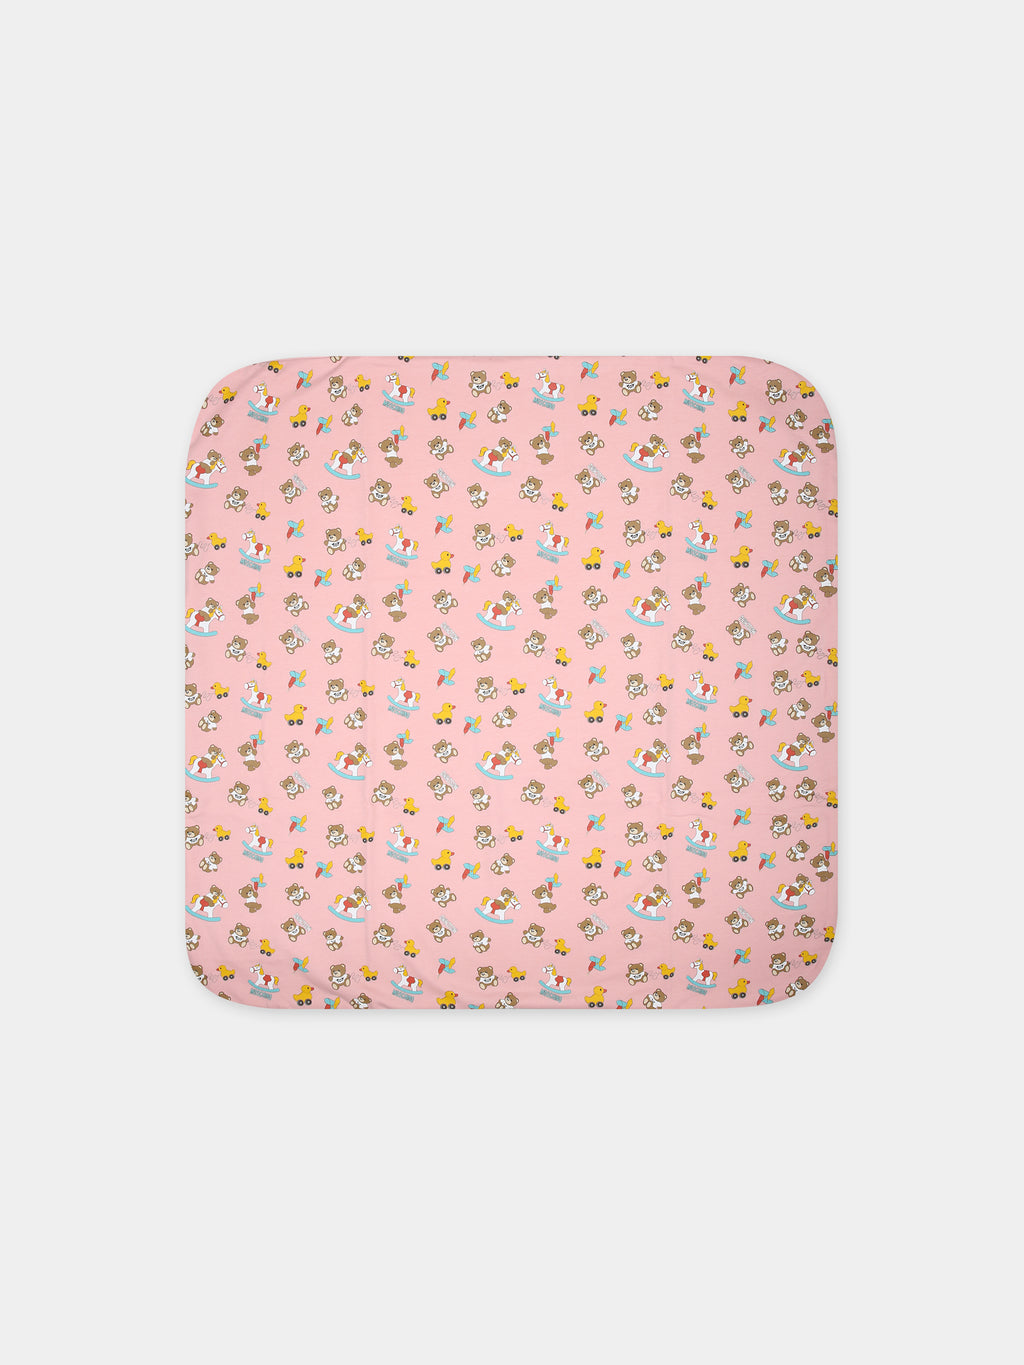 Pink baby girl blanket with all-over pattern